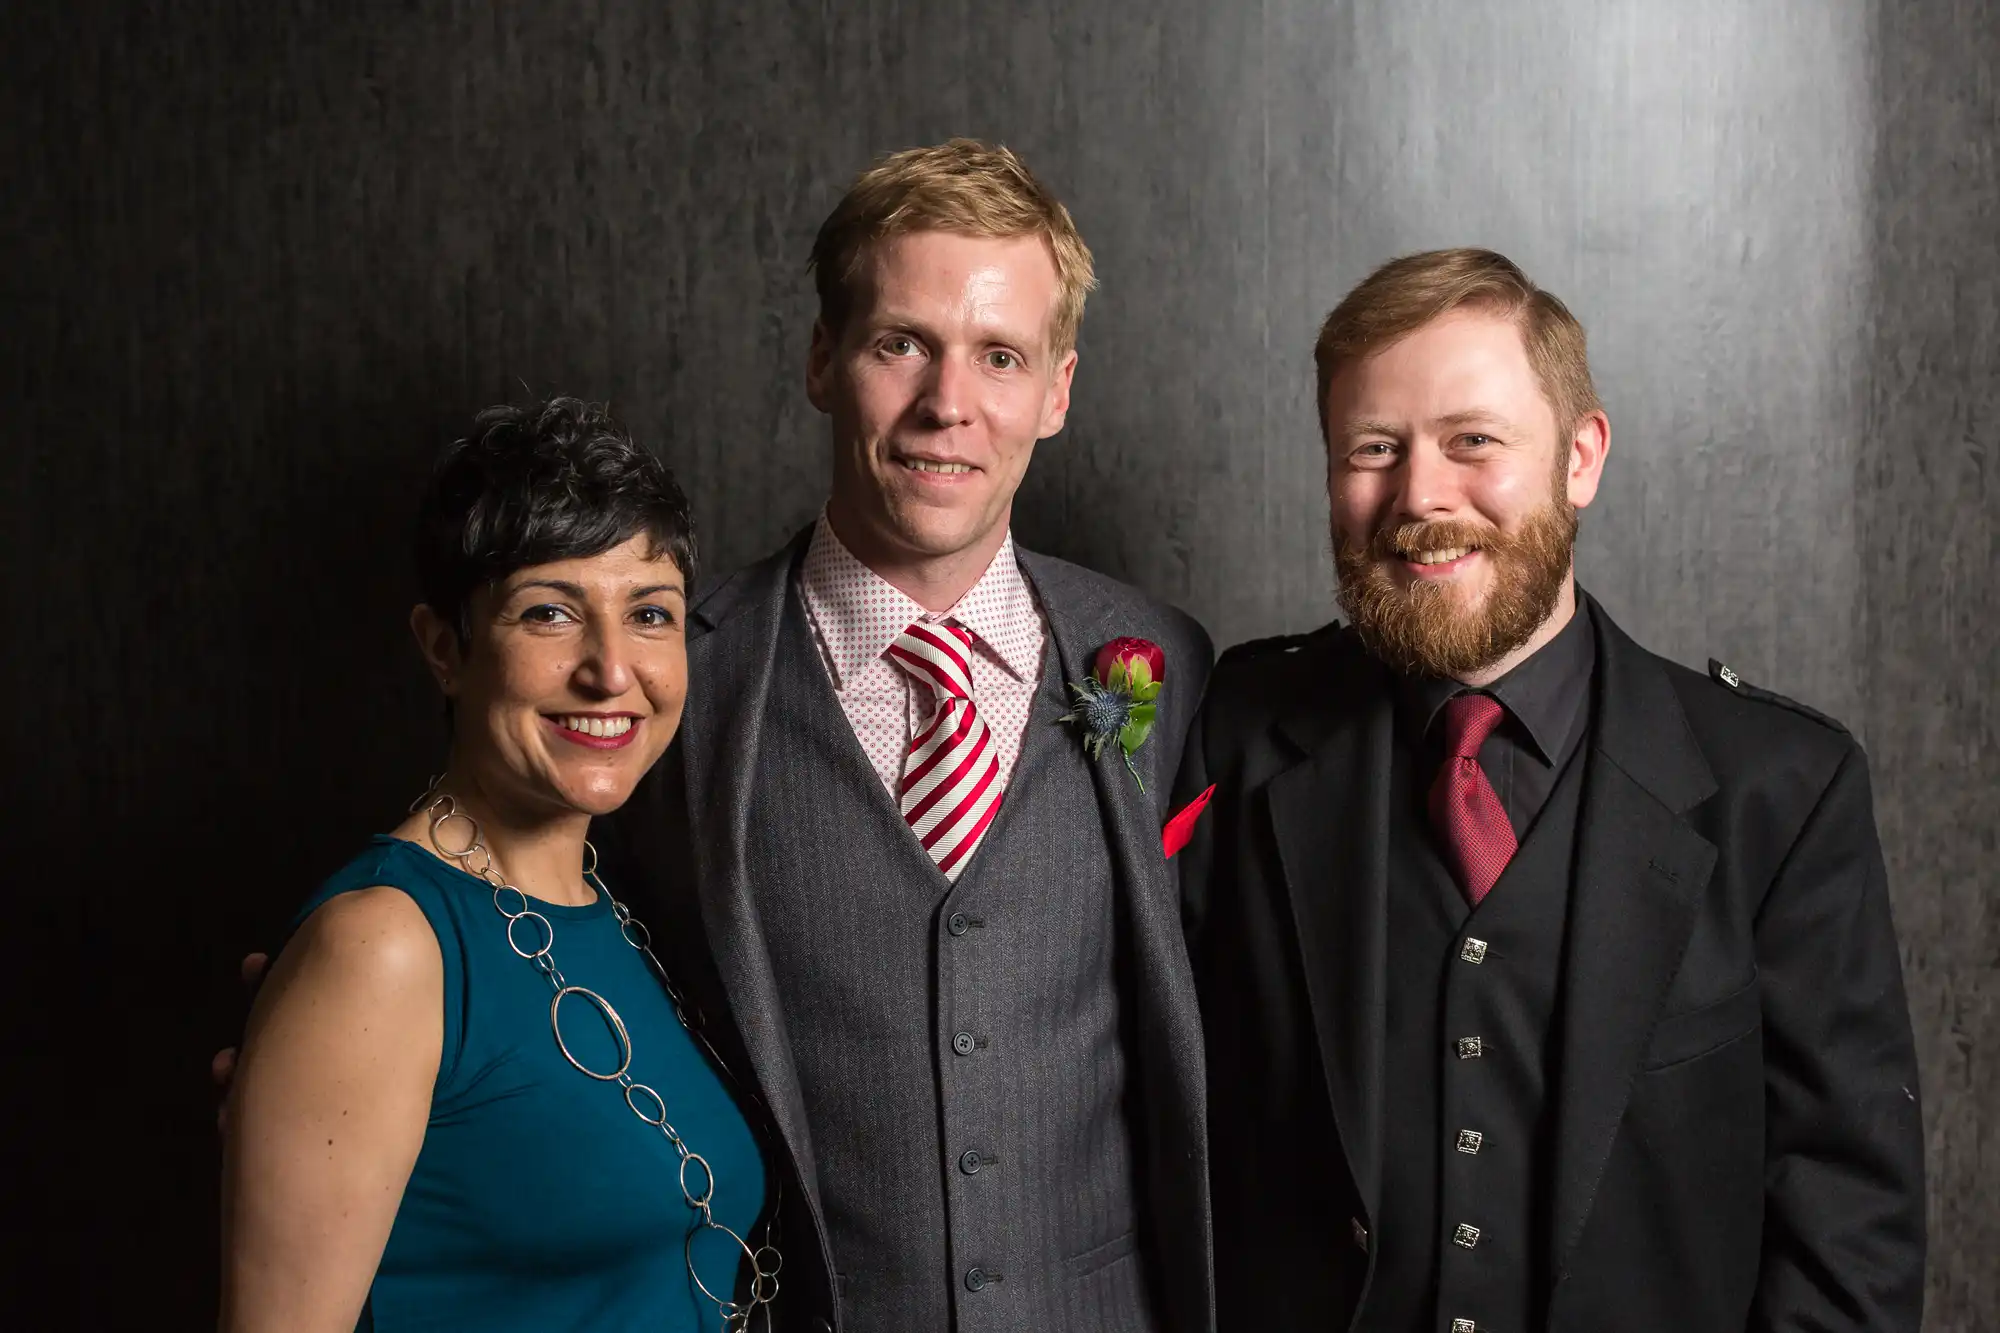 Three adults dressed in formal attire smiling for a photo against a gray textured backdrop.